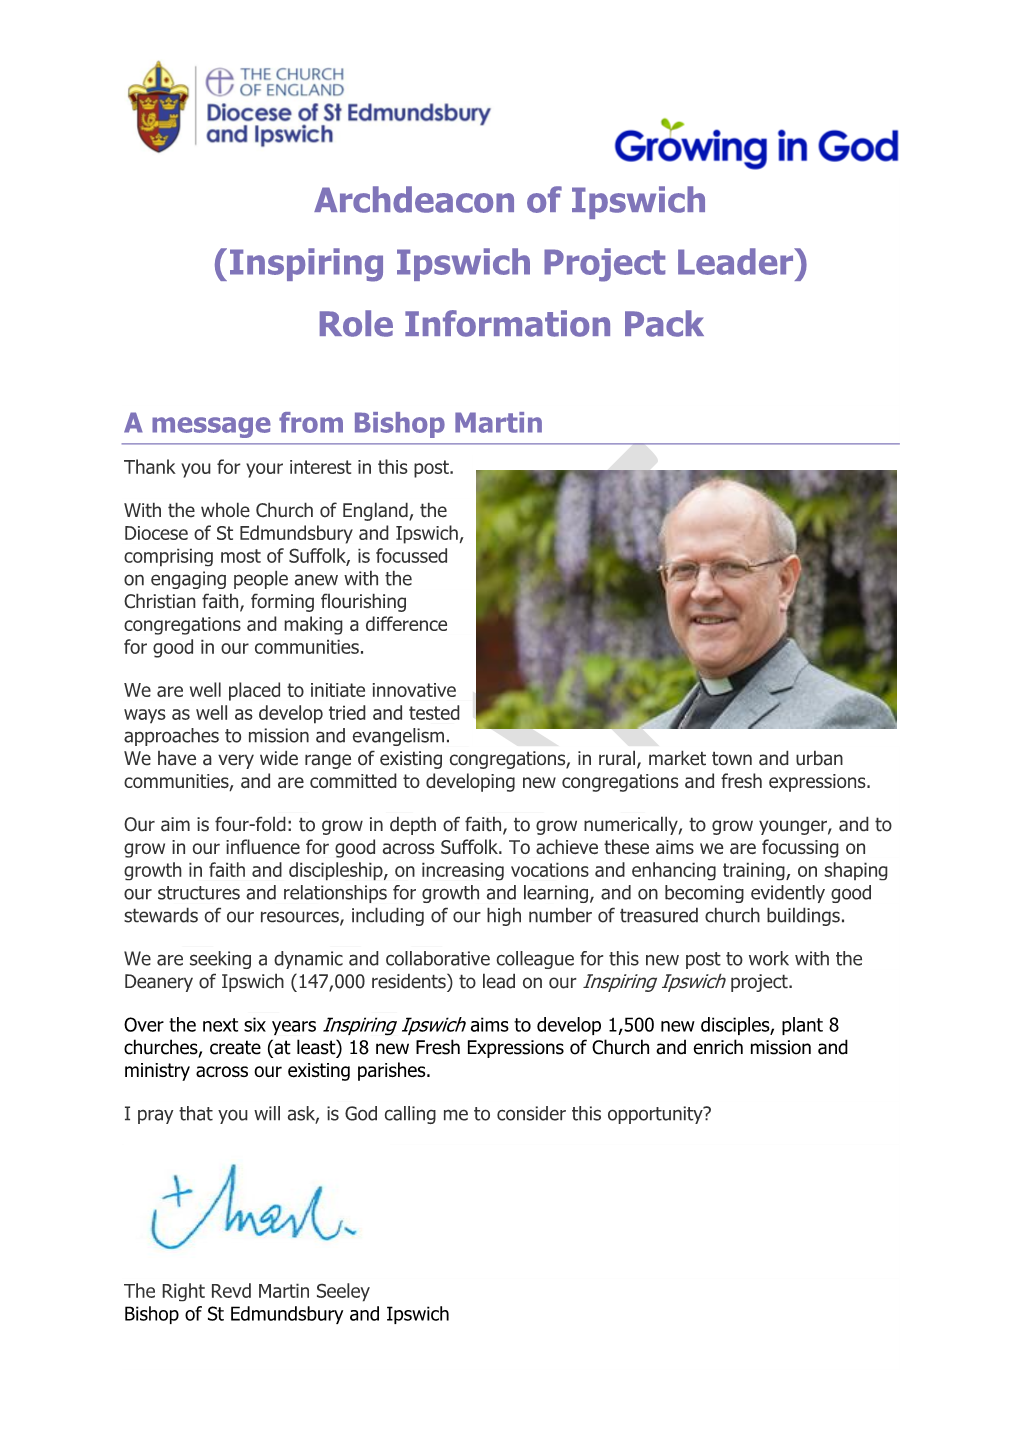 Archdeacon of Ipswich (Inspiring Ipswich Project Leader) Role Information Pack